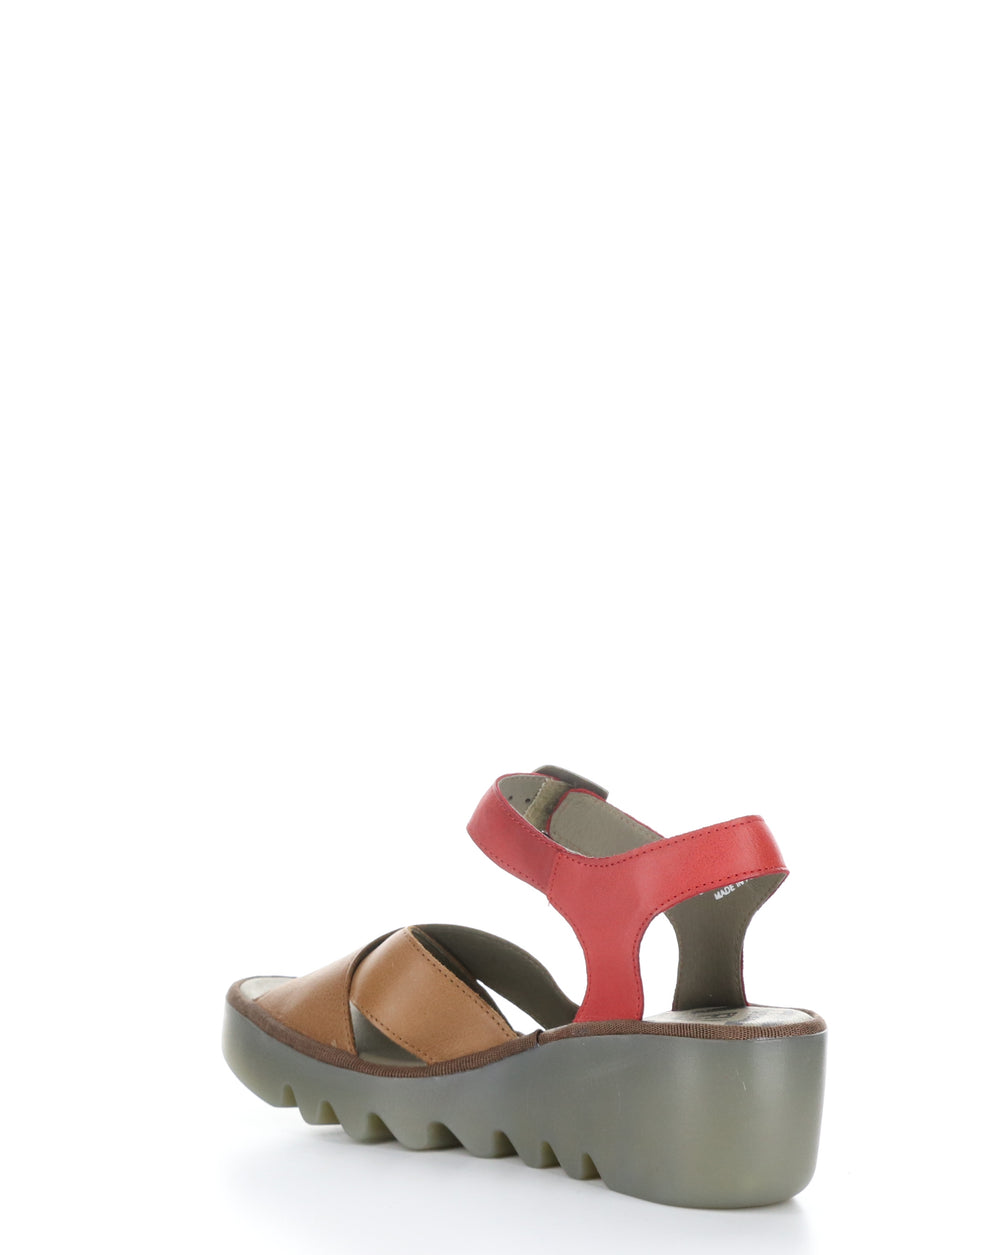 BACE411FLY 002 TAN/CHERRY RED Velcro Sandals